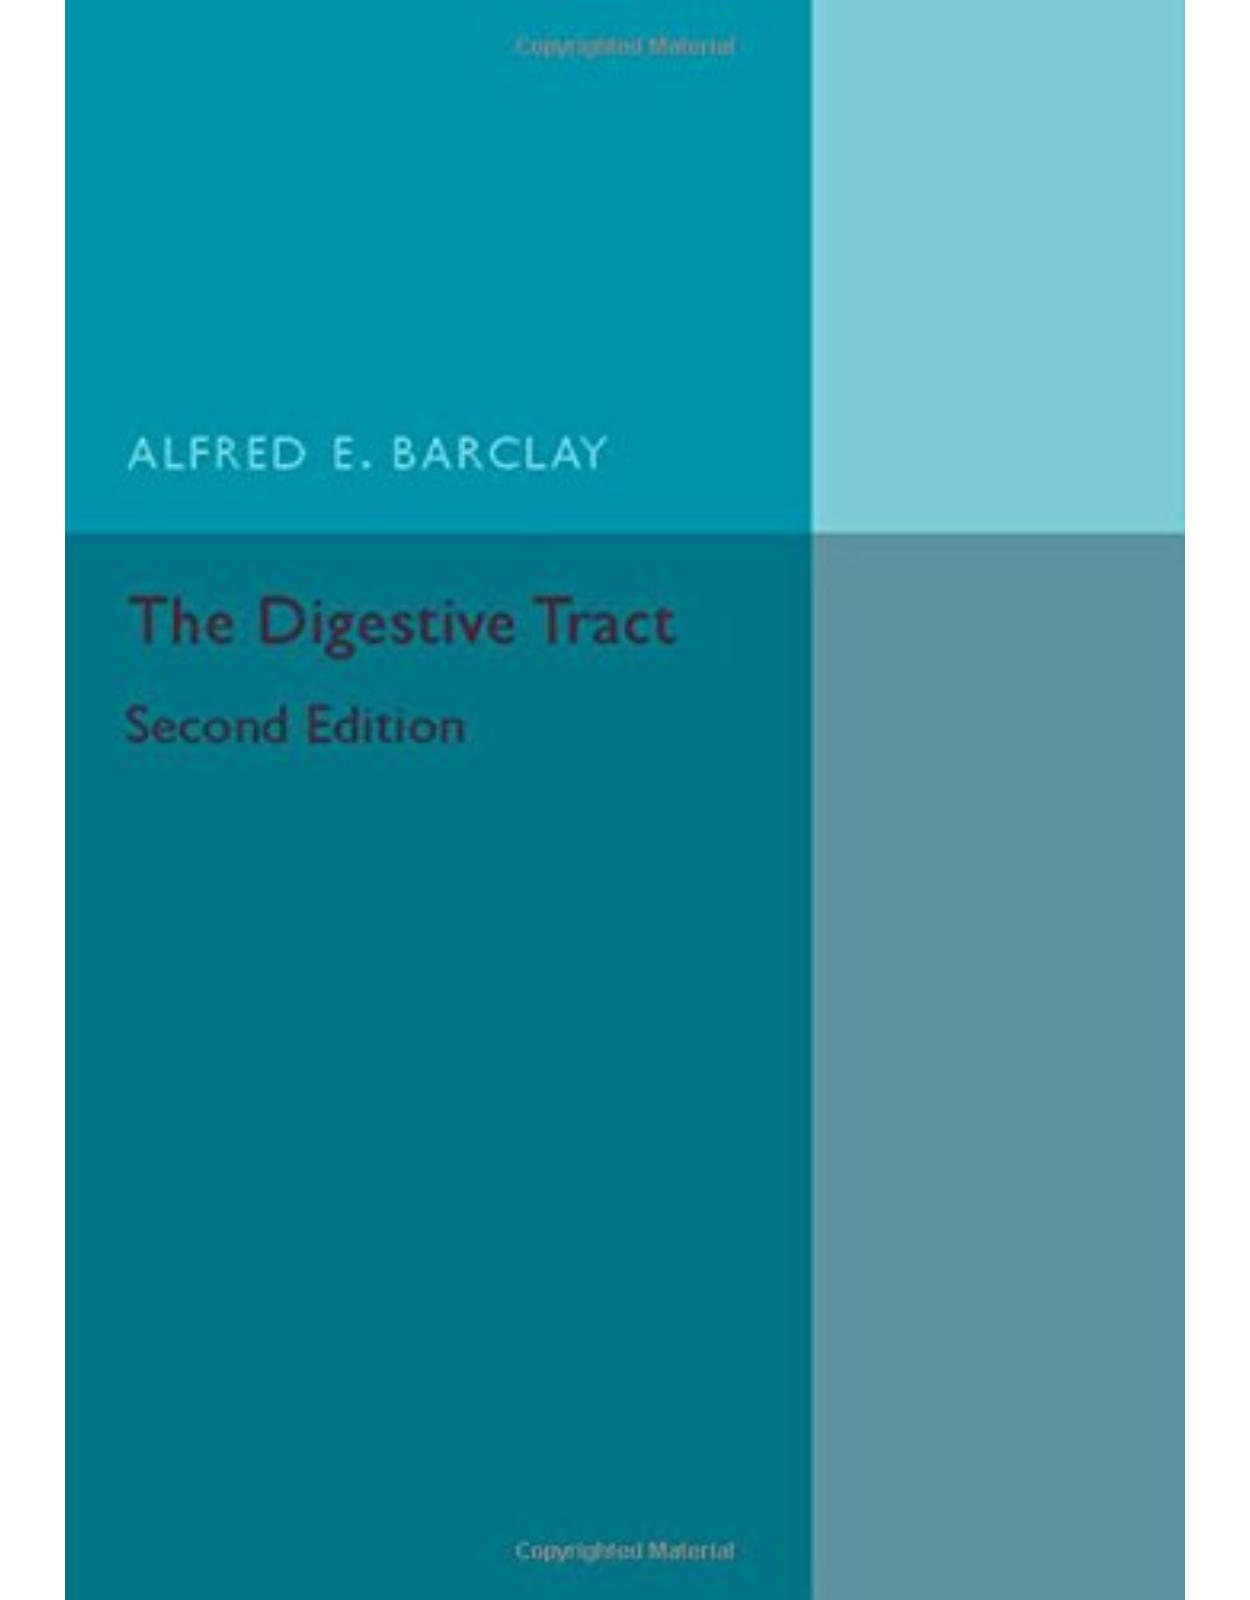 The Digestive Tract: A Radiological Study of its Anatomy, Physiology and Pathology